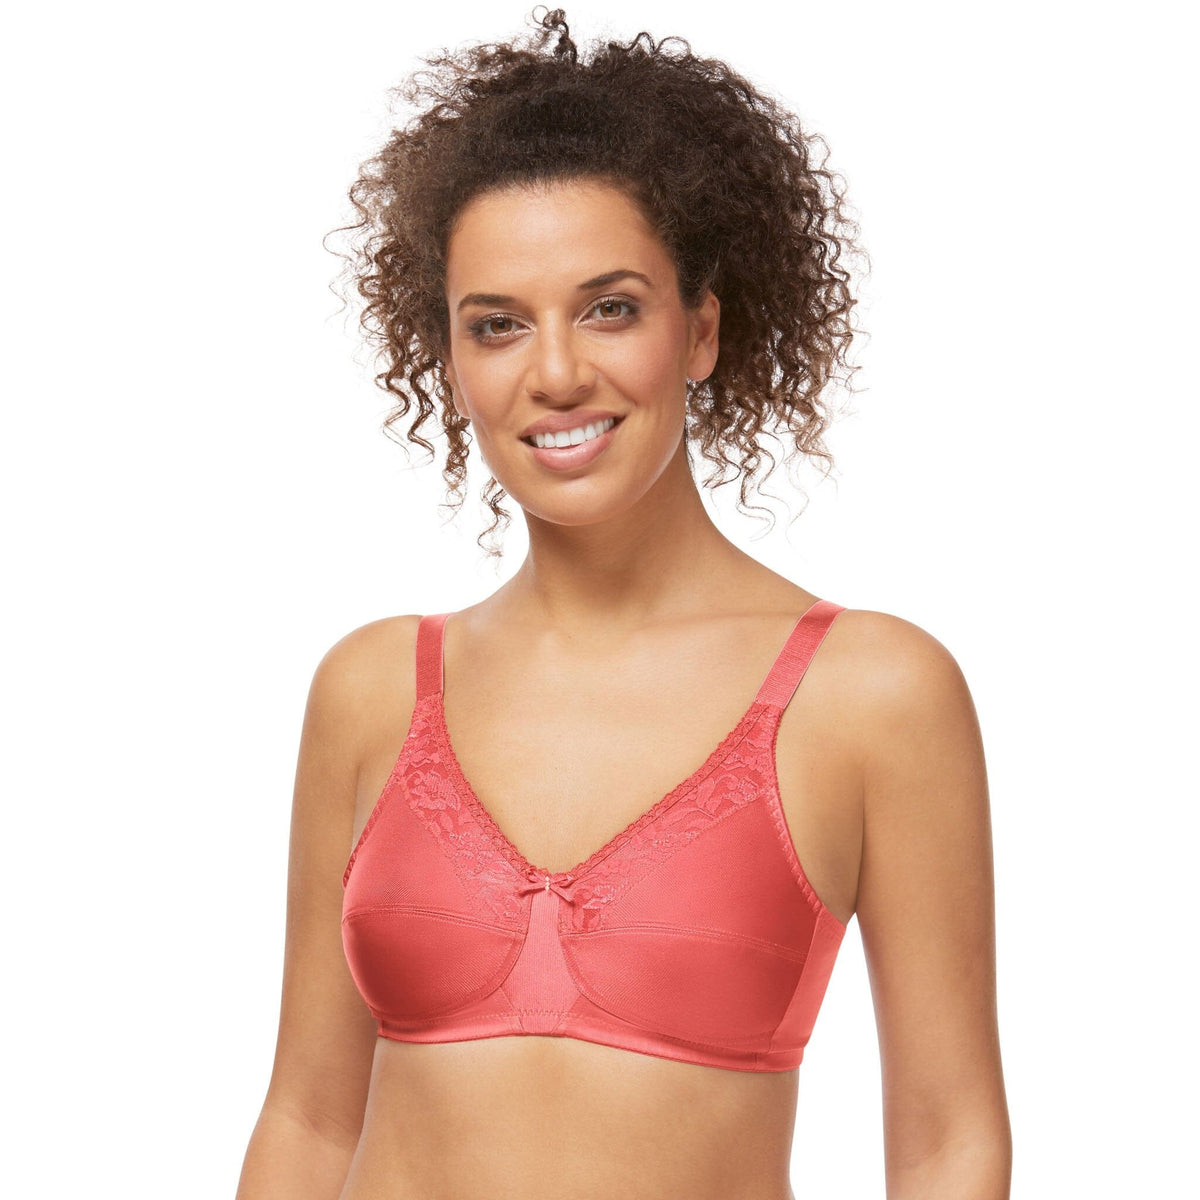 Breast Cancer Bras, Mastectomy Bras, Lace Breast Cancer, 49% OFF